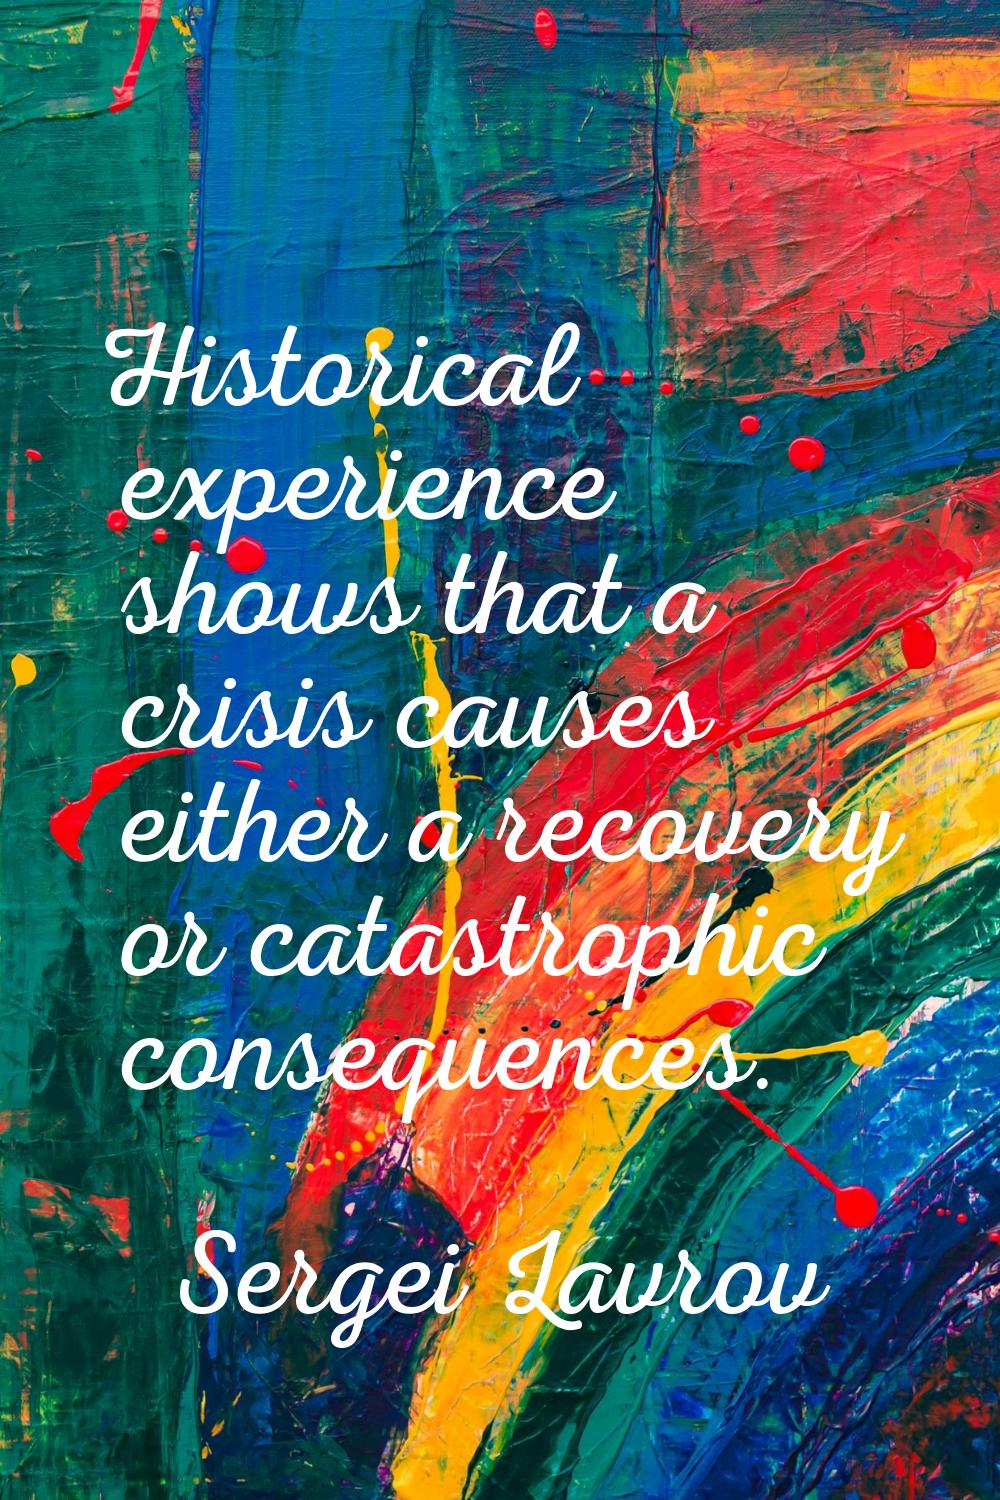 Historical experience shows that a crisis causes either a recovery or catastrophic consequences.